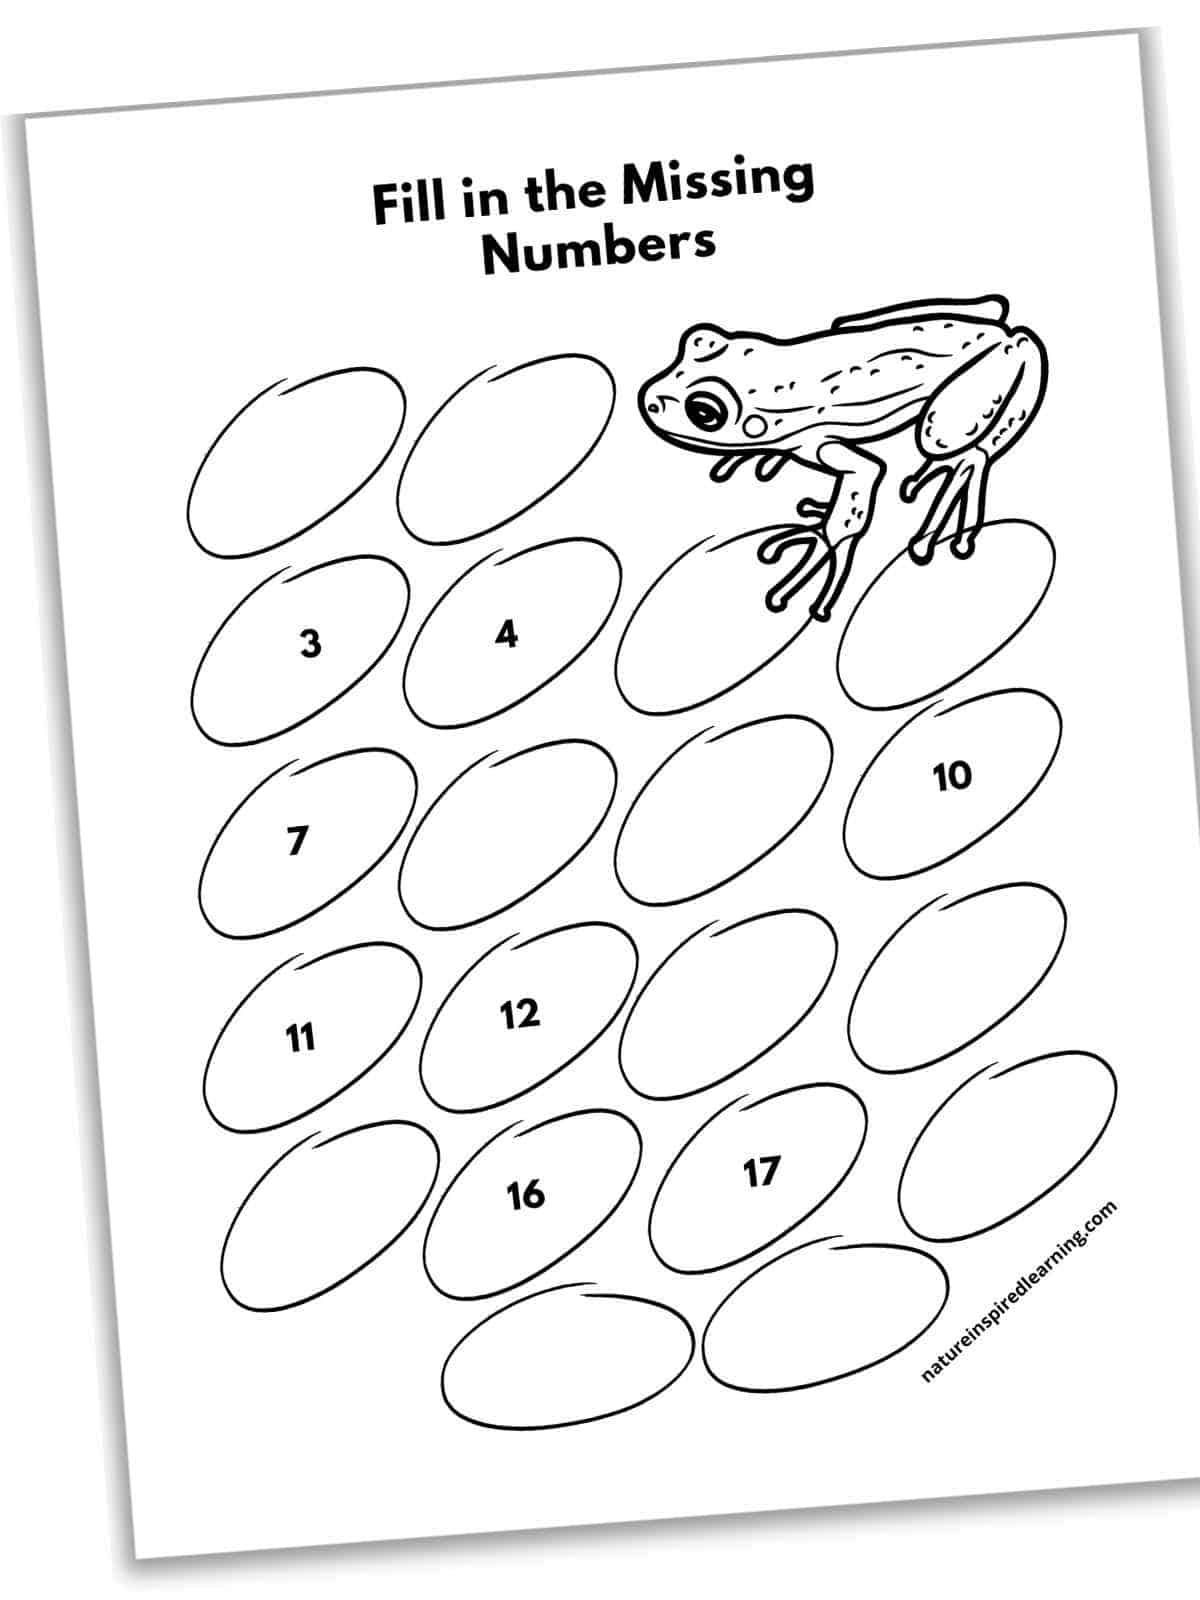 worksheet with a black and white frog upper right and twenty lily pads. Some lily pads have numbers others are blank.